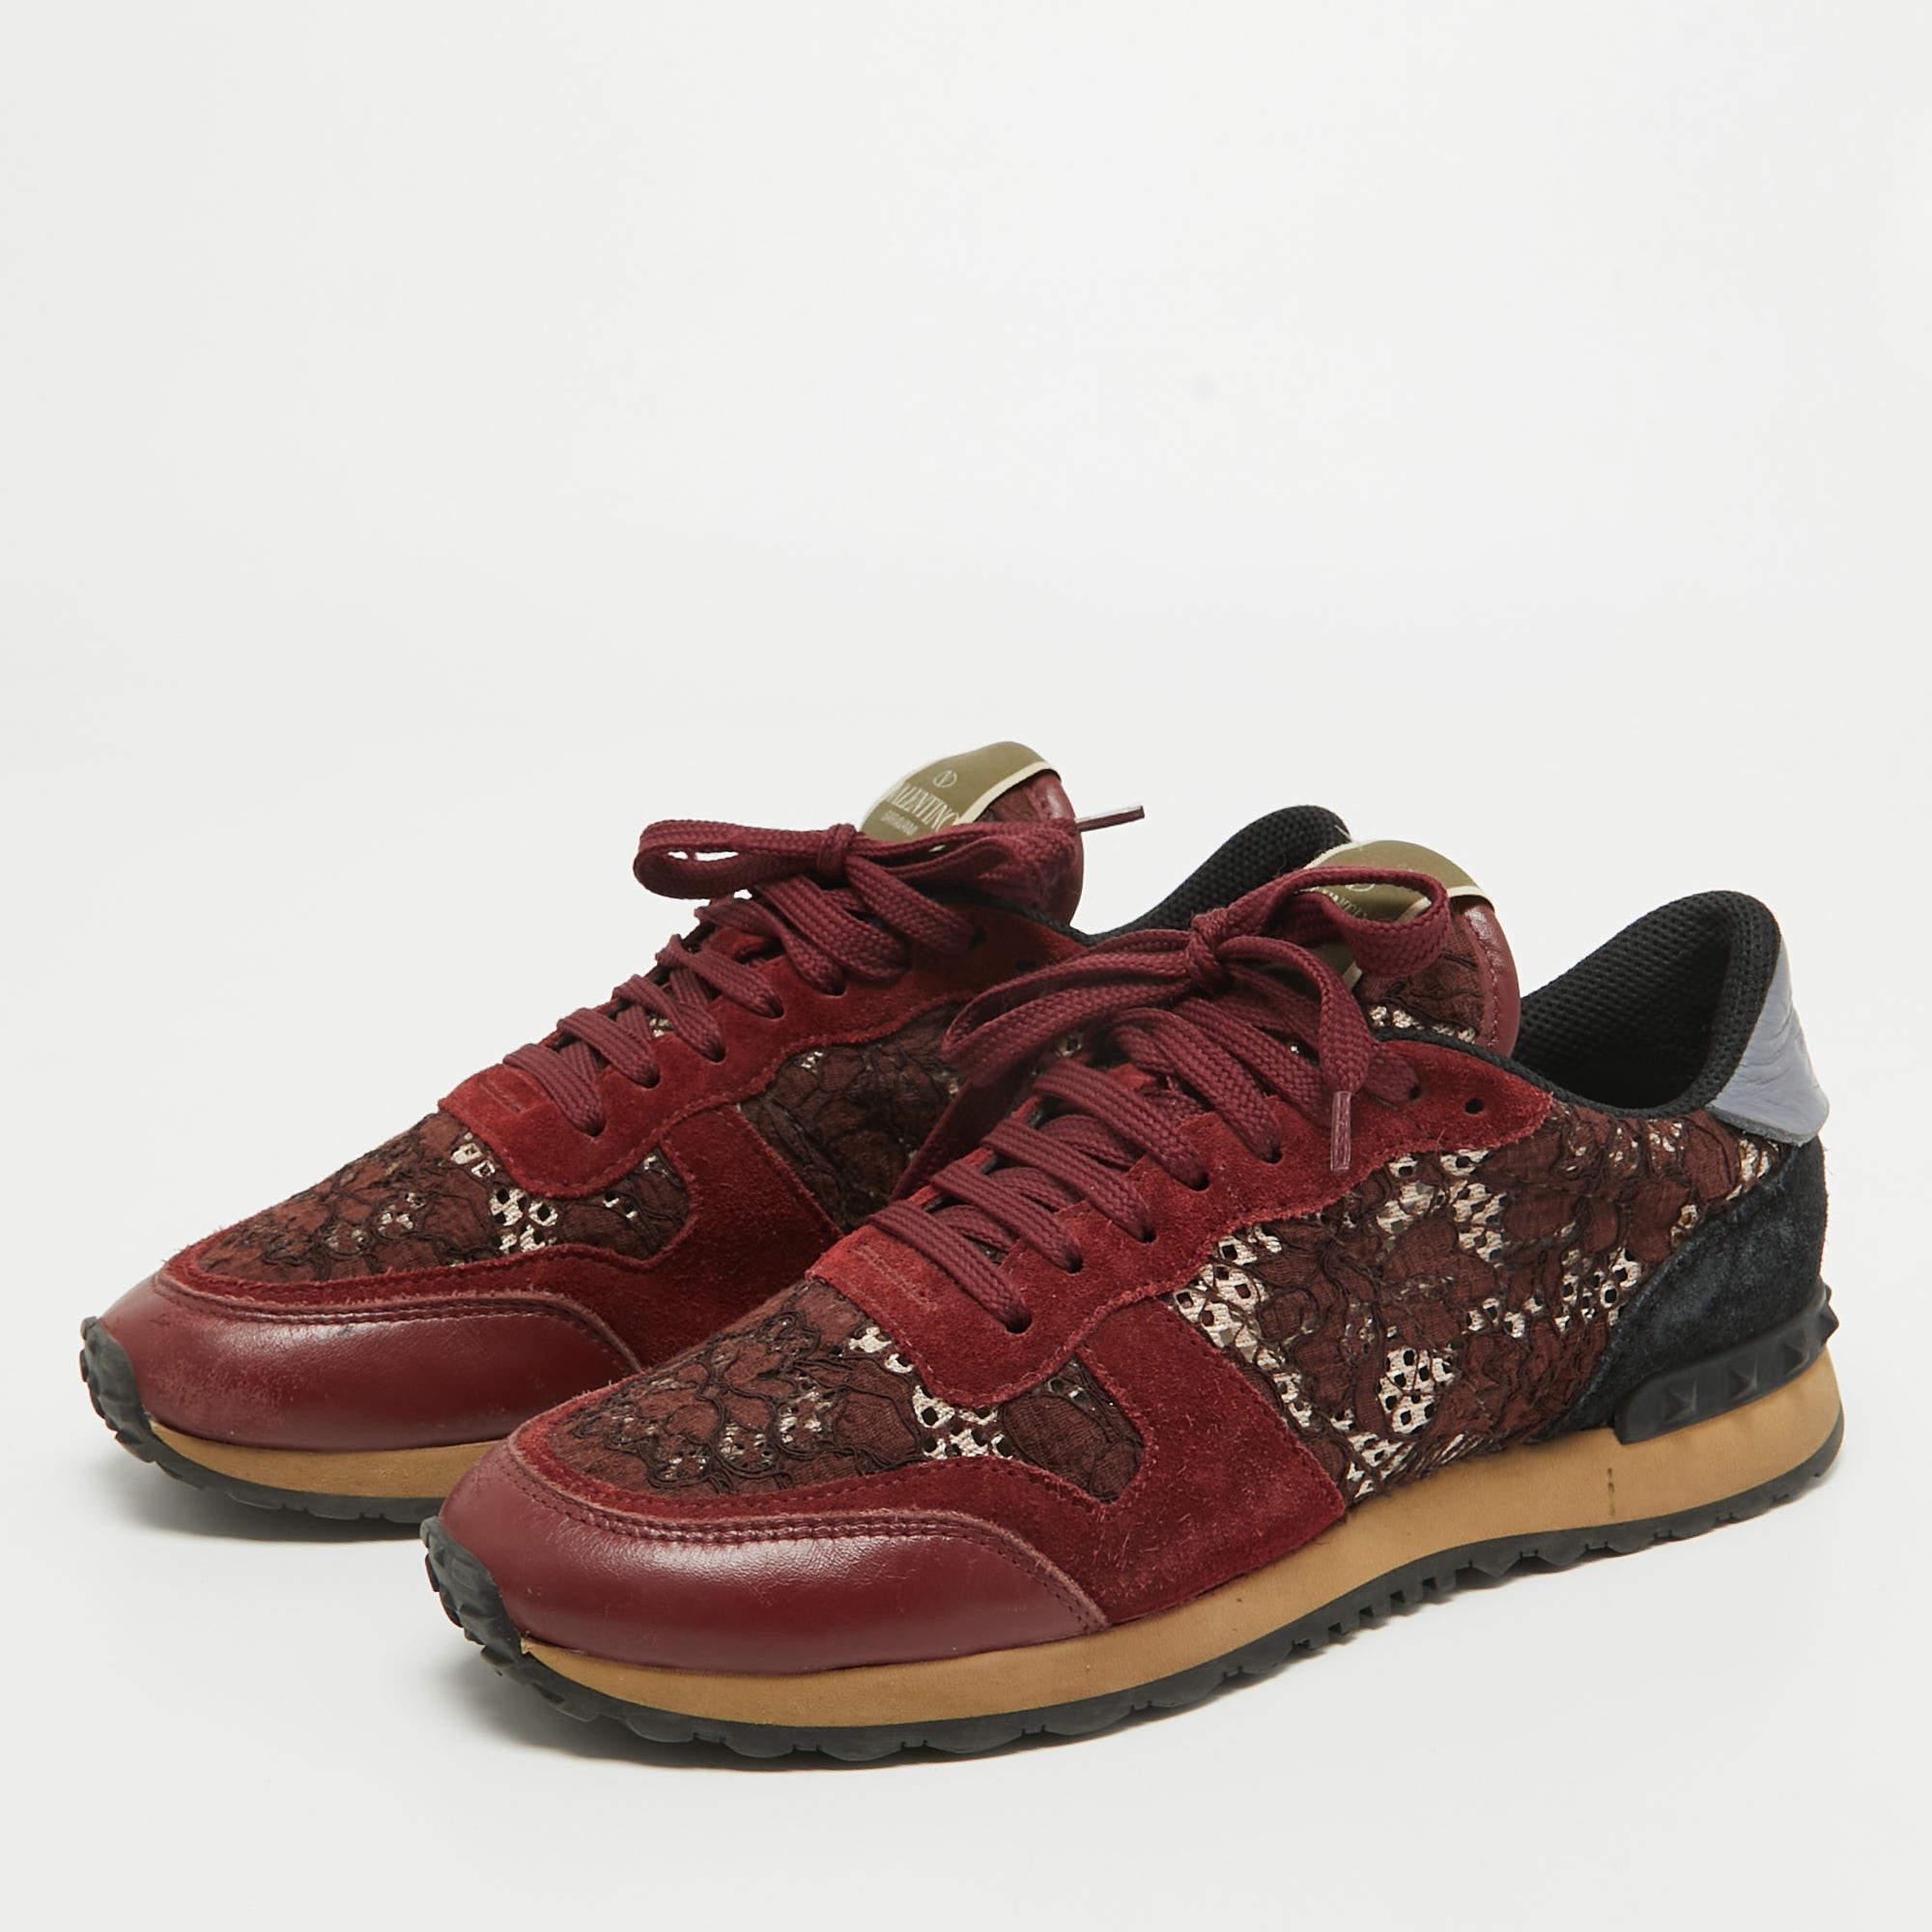 Spend your days in high comfort with these Rockrunner sneakers from Valentino! They've been wonderfully crafted from a combination of leather, lace as well as suede and designed with signature pyramid studs on the counters, laces on the vamps, and